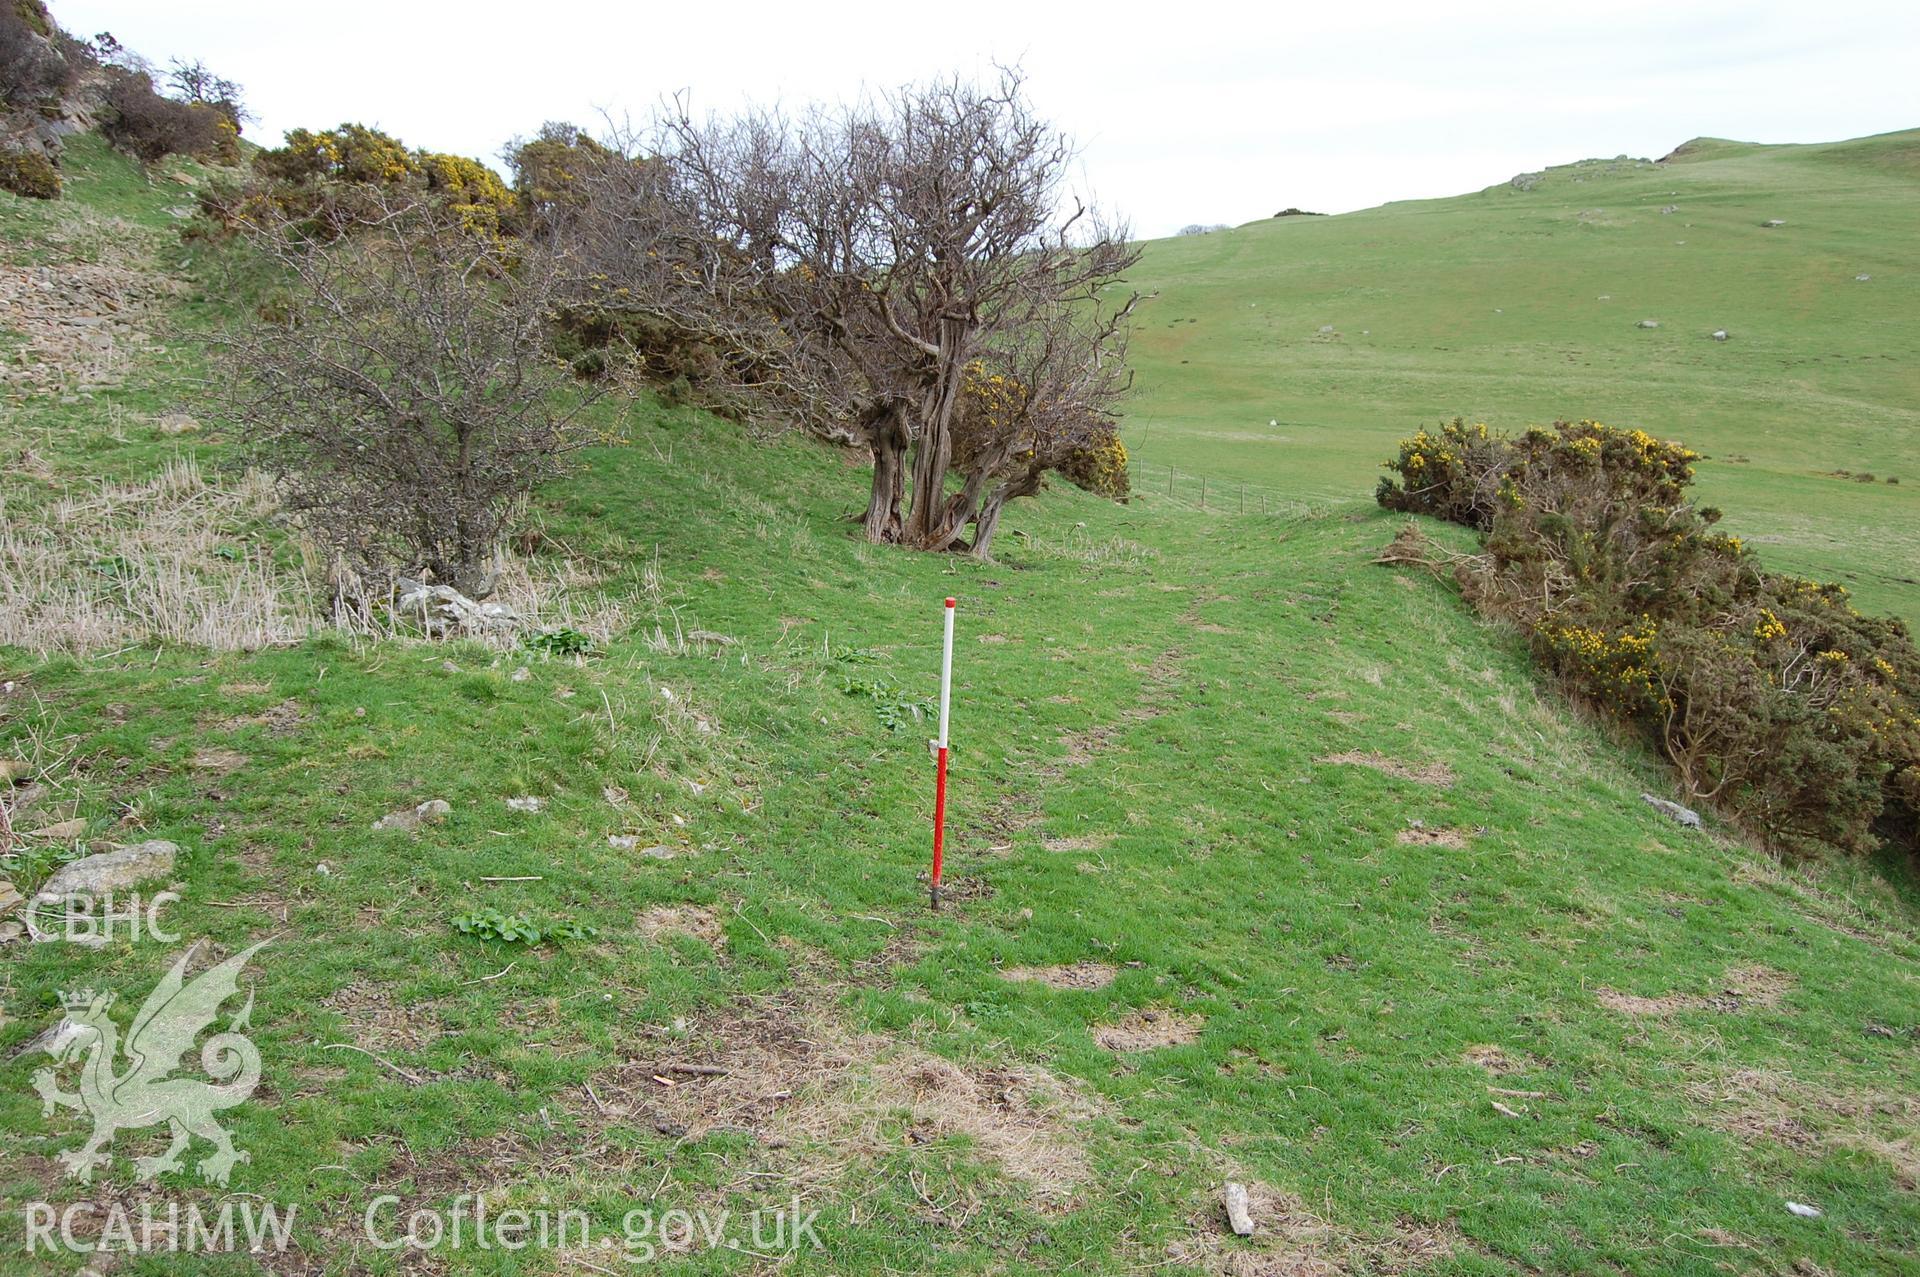 Digital photograph from an archaeological assessment of Deganwy Castle, carried out by Gwynedd Archaeological Trust, 2009. Road up to South gate.